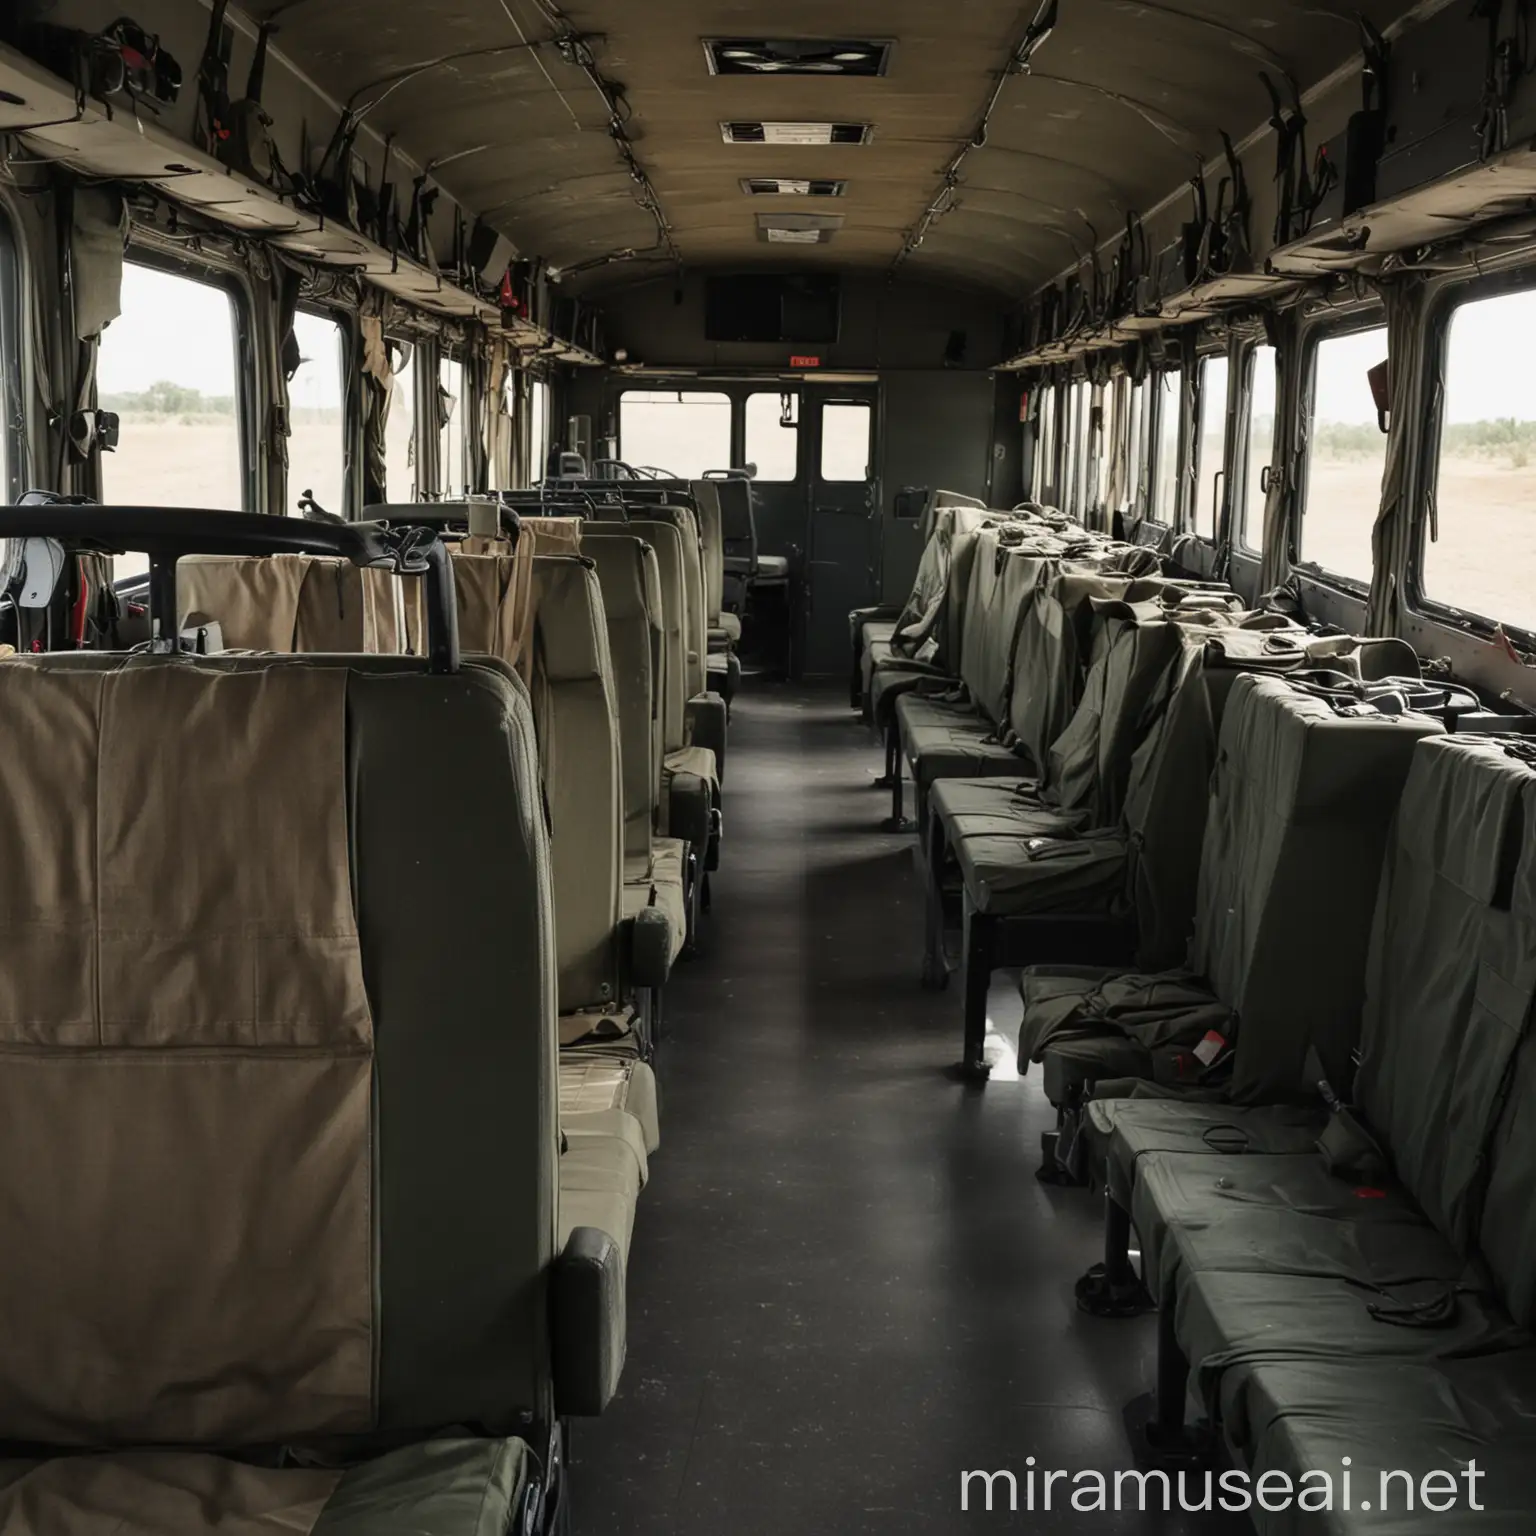 empty soldier seat inside of Military convoy vehicle
